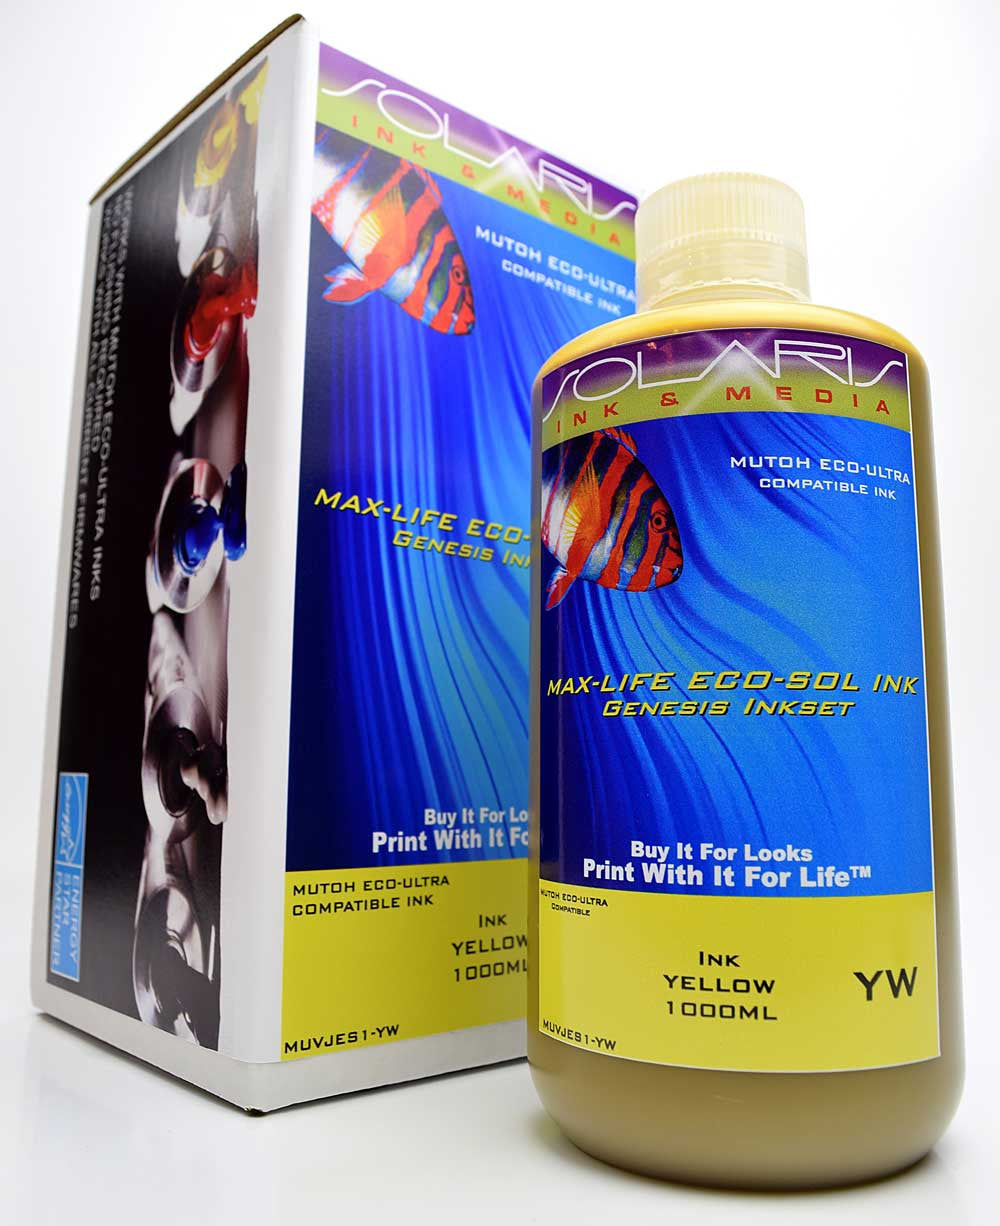 Mutoh Eco-Ultra Ink Yellow 1 Liter